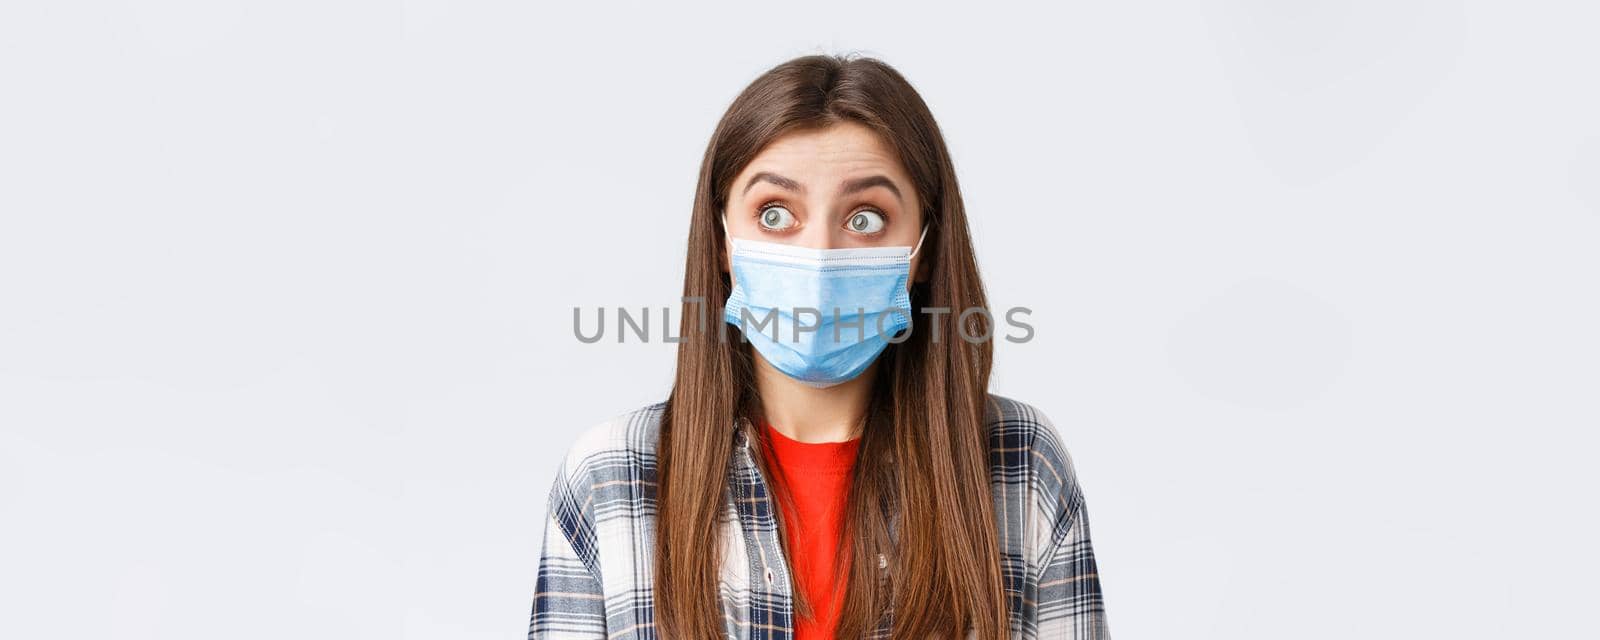 Coronavirus outbreak, leisure on quarantine, social distancing and emotions concept. Close-up of surprised caucasian woman in casual clothes and medical mask, staring left speechless.